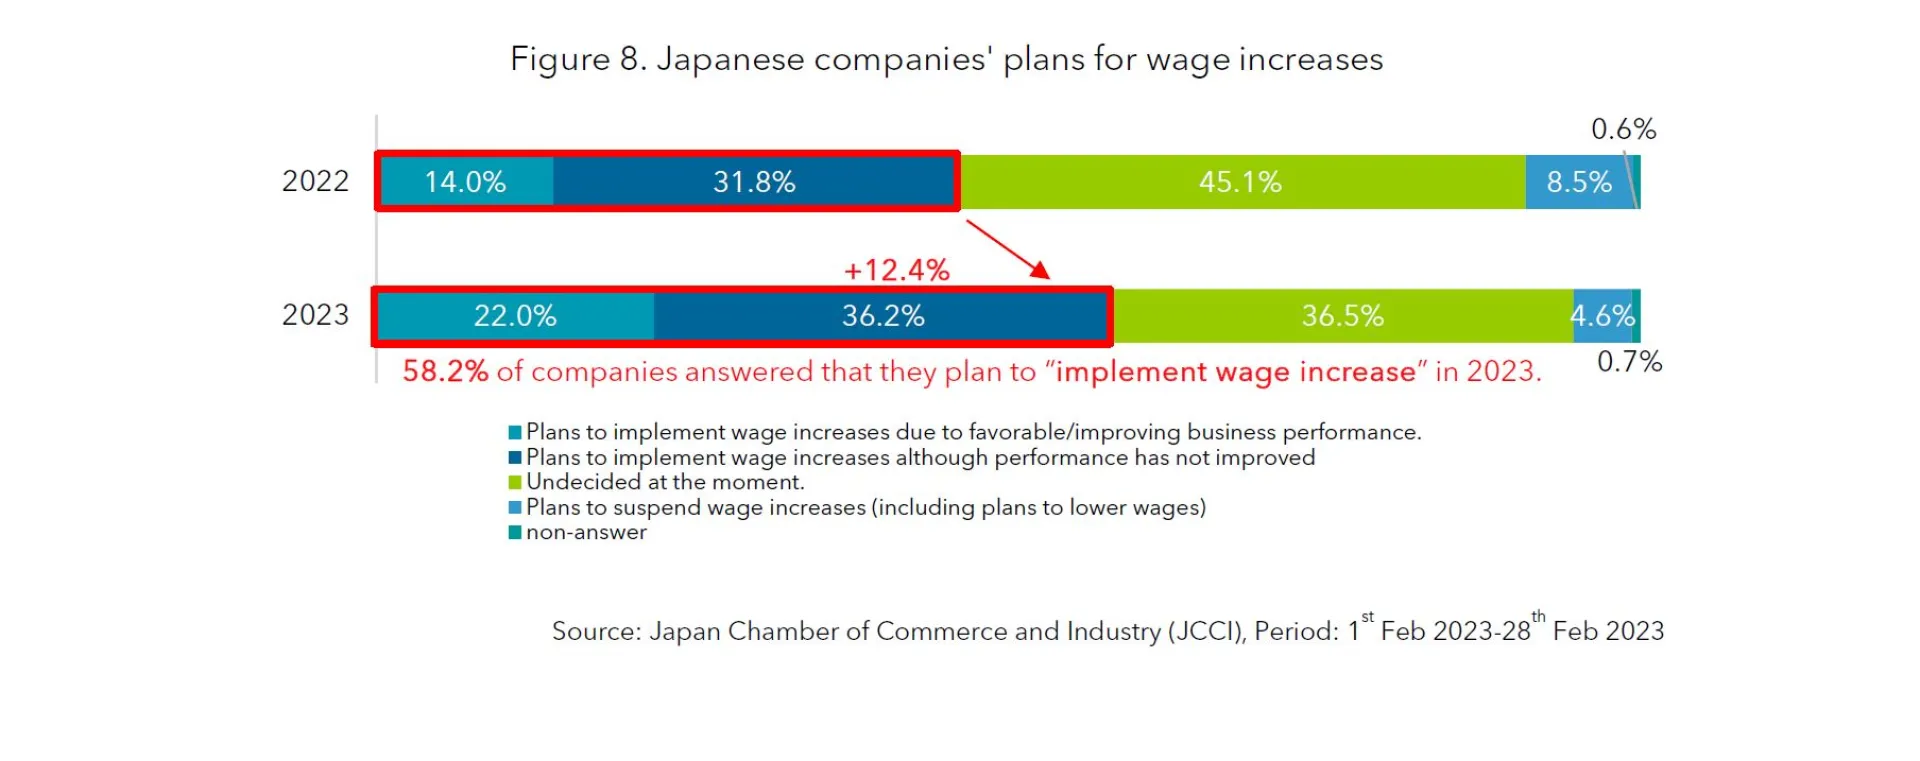 Figure 8 Japanese companies' plans for wage increases